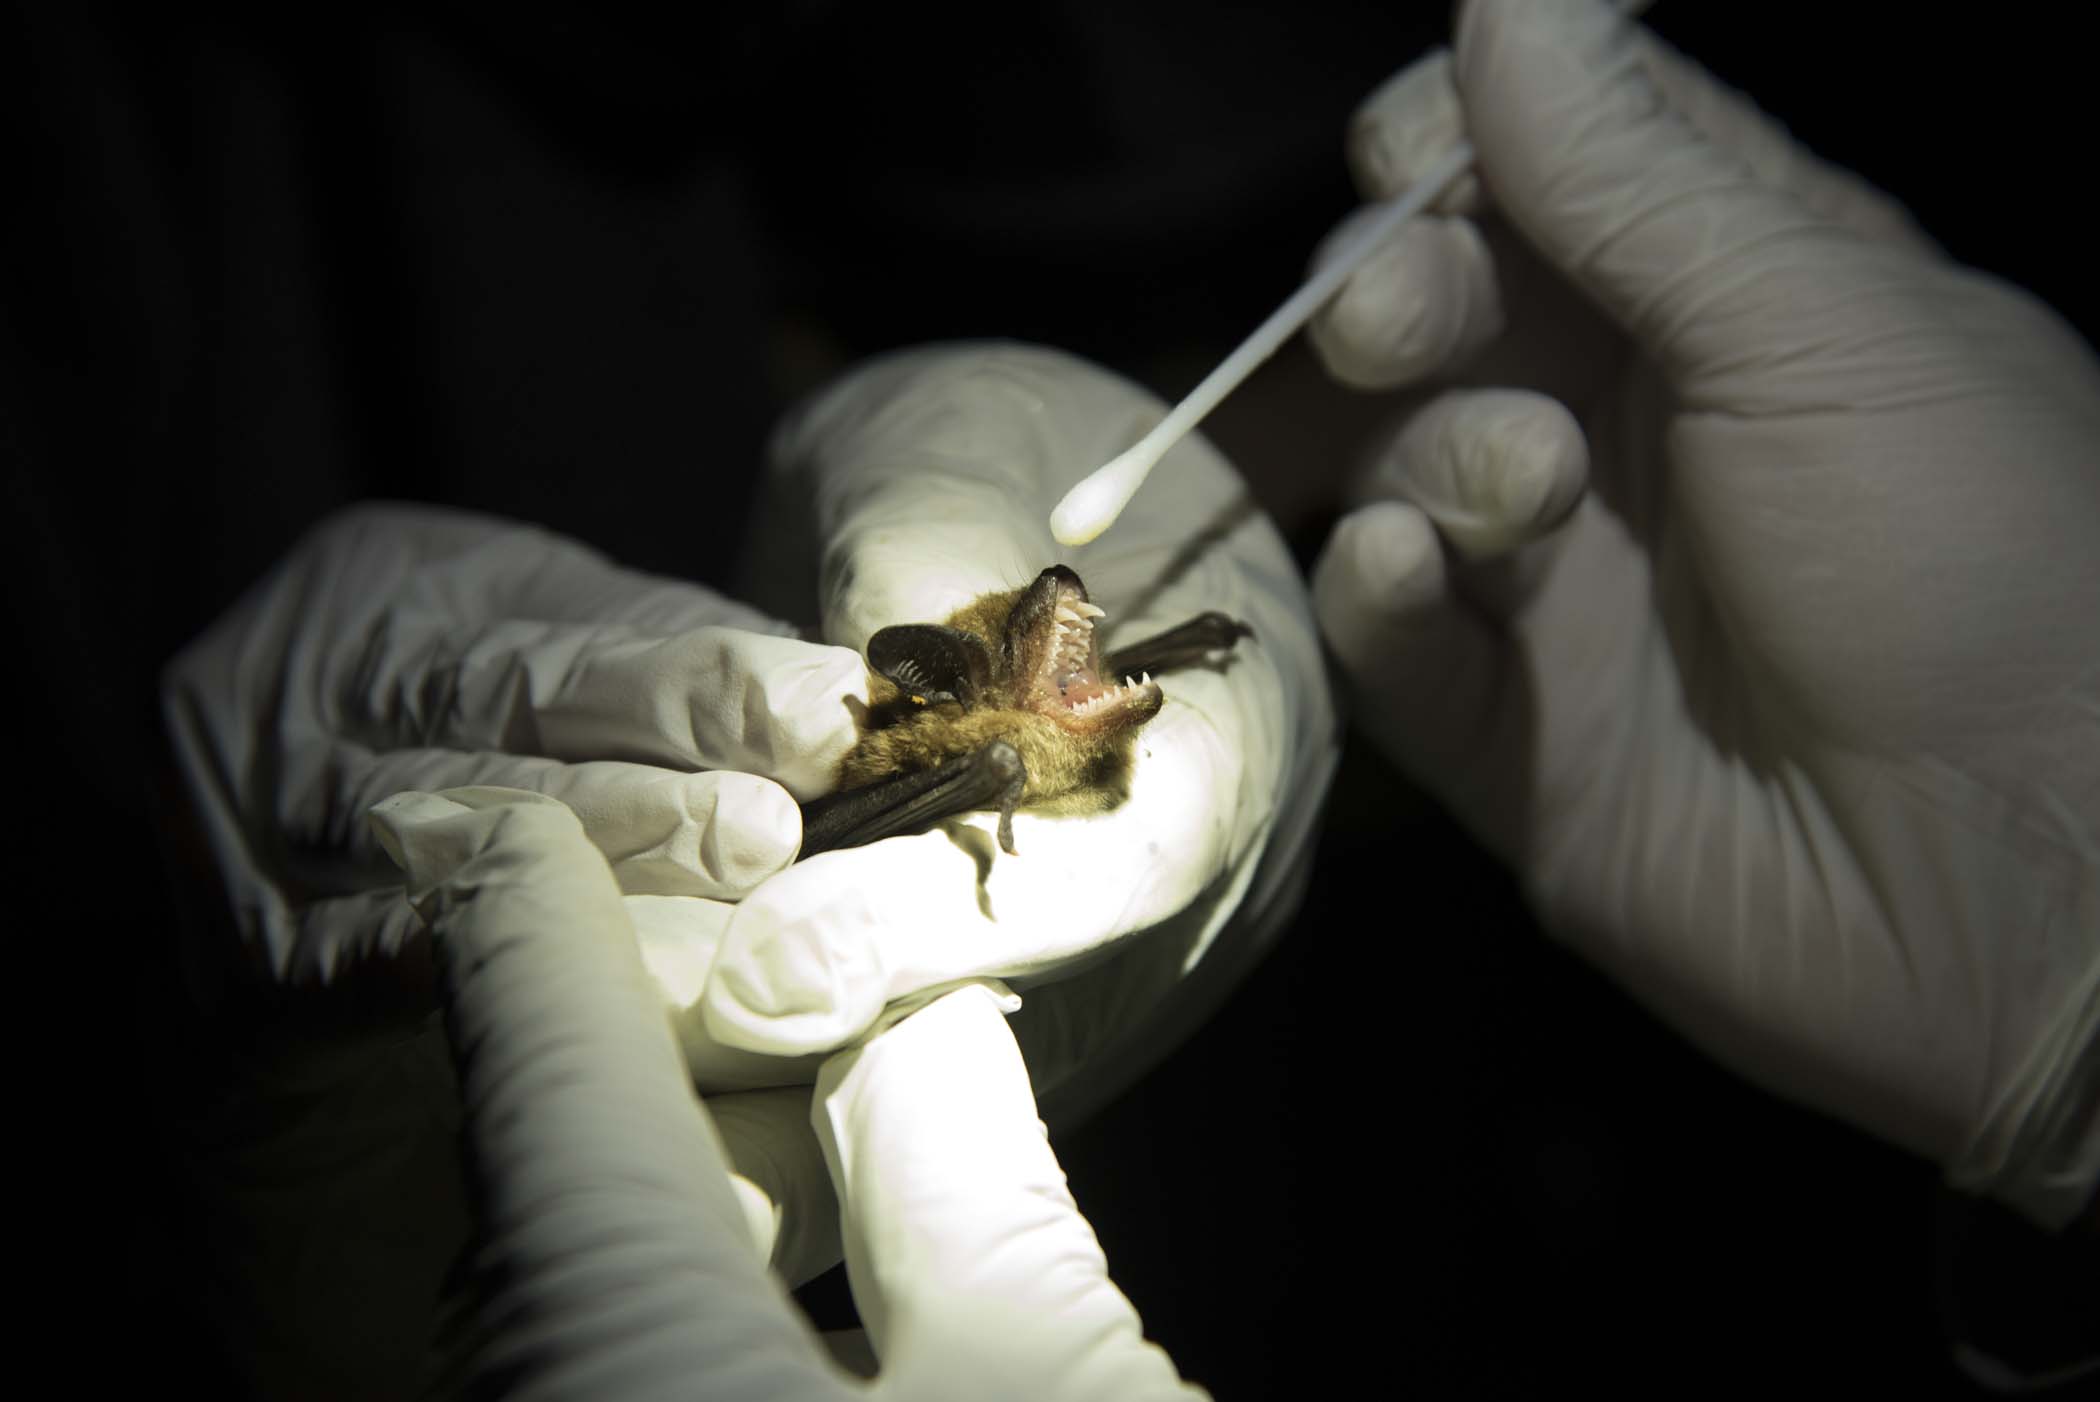 Swabbing the nose of a bat to test for White Nose Syndrome.